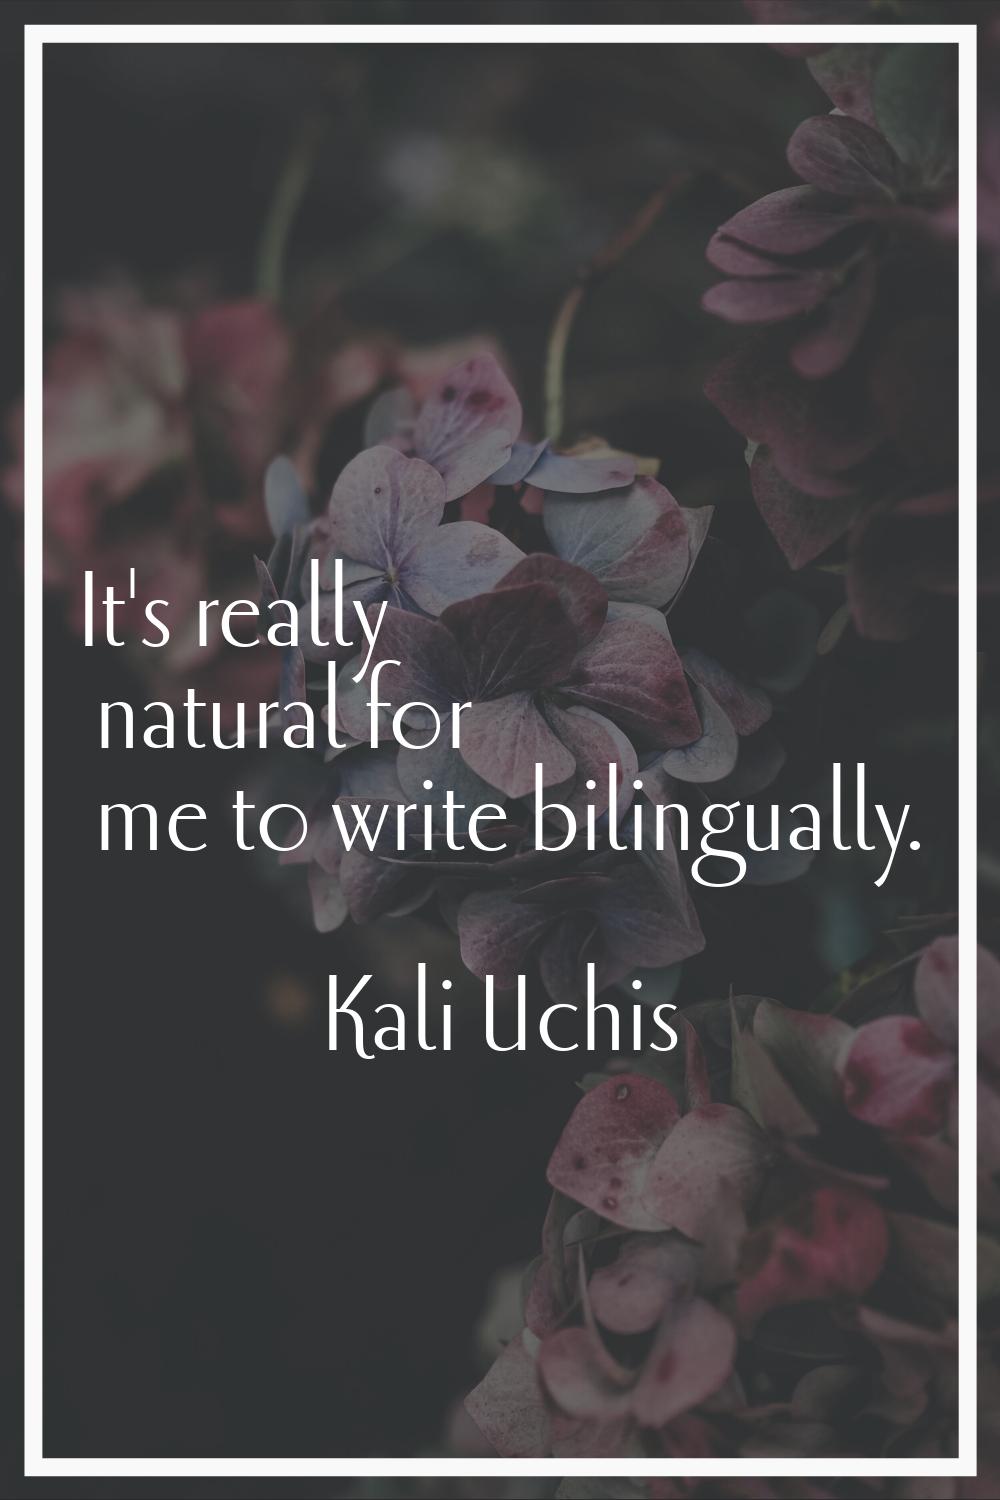 It's really natural for me to write bilingually.